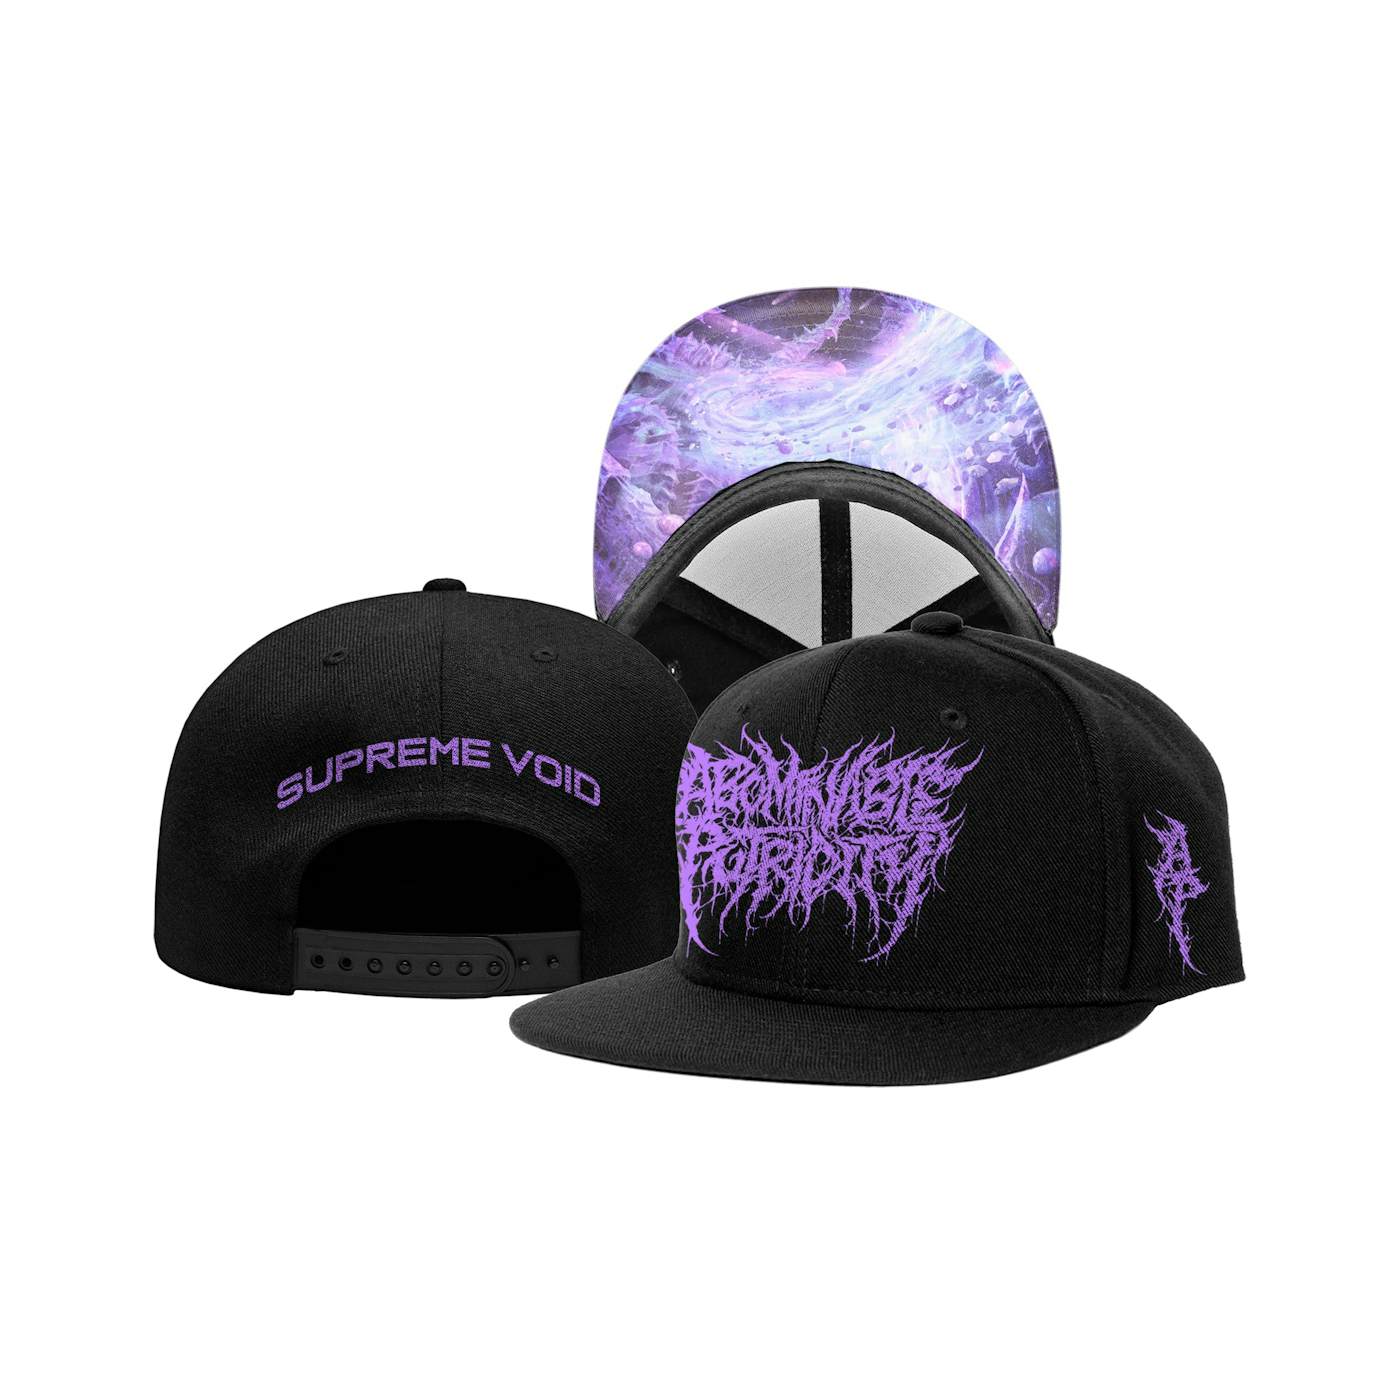 Abominable Putridity "Supreme Void" Hat